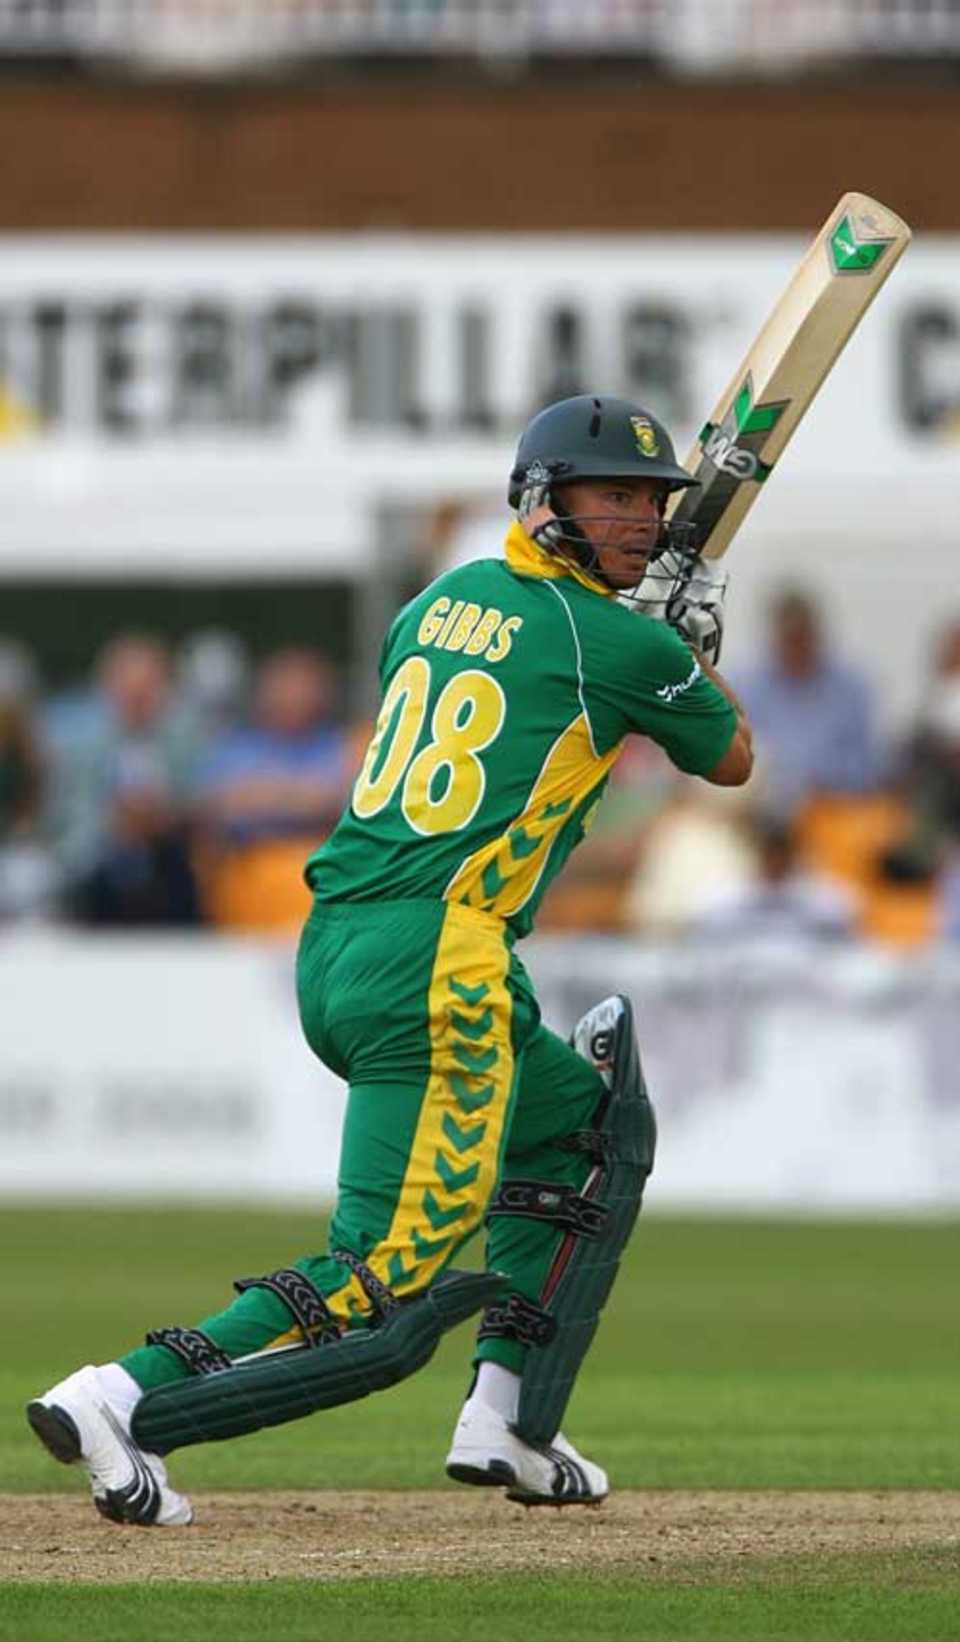 Herschelle Gibbs cracked 81 in the South African run chase